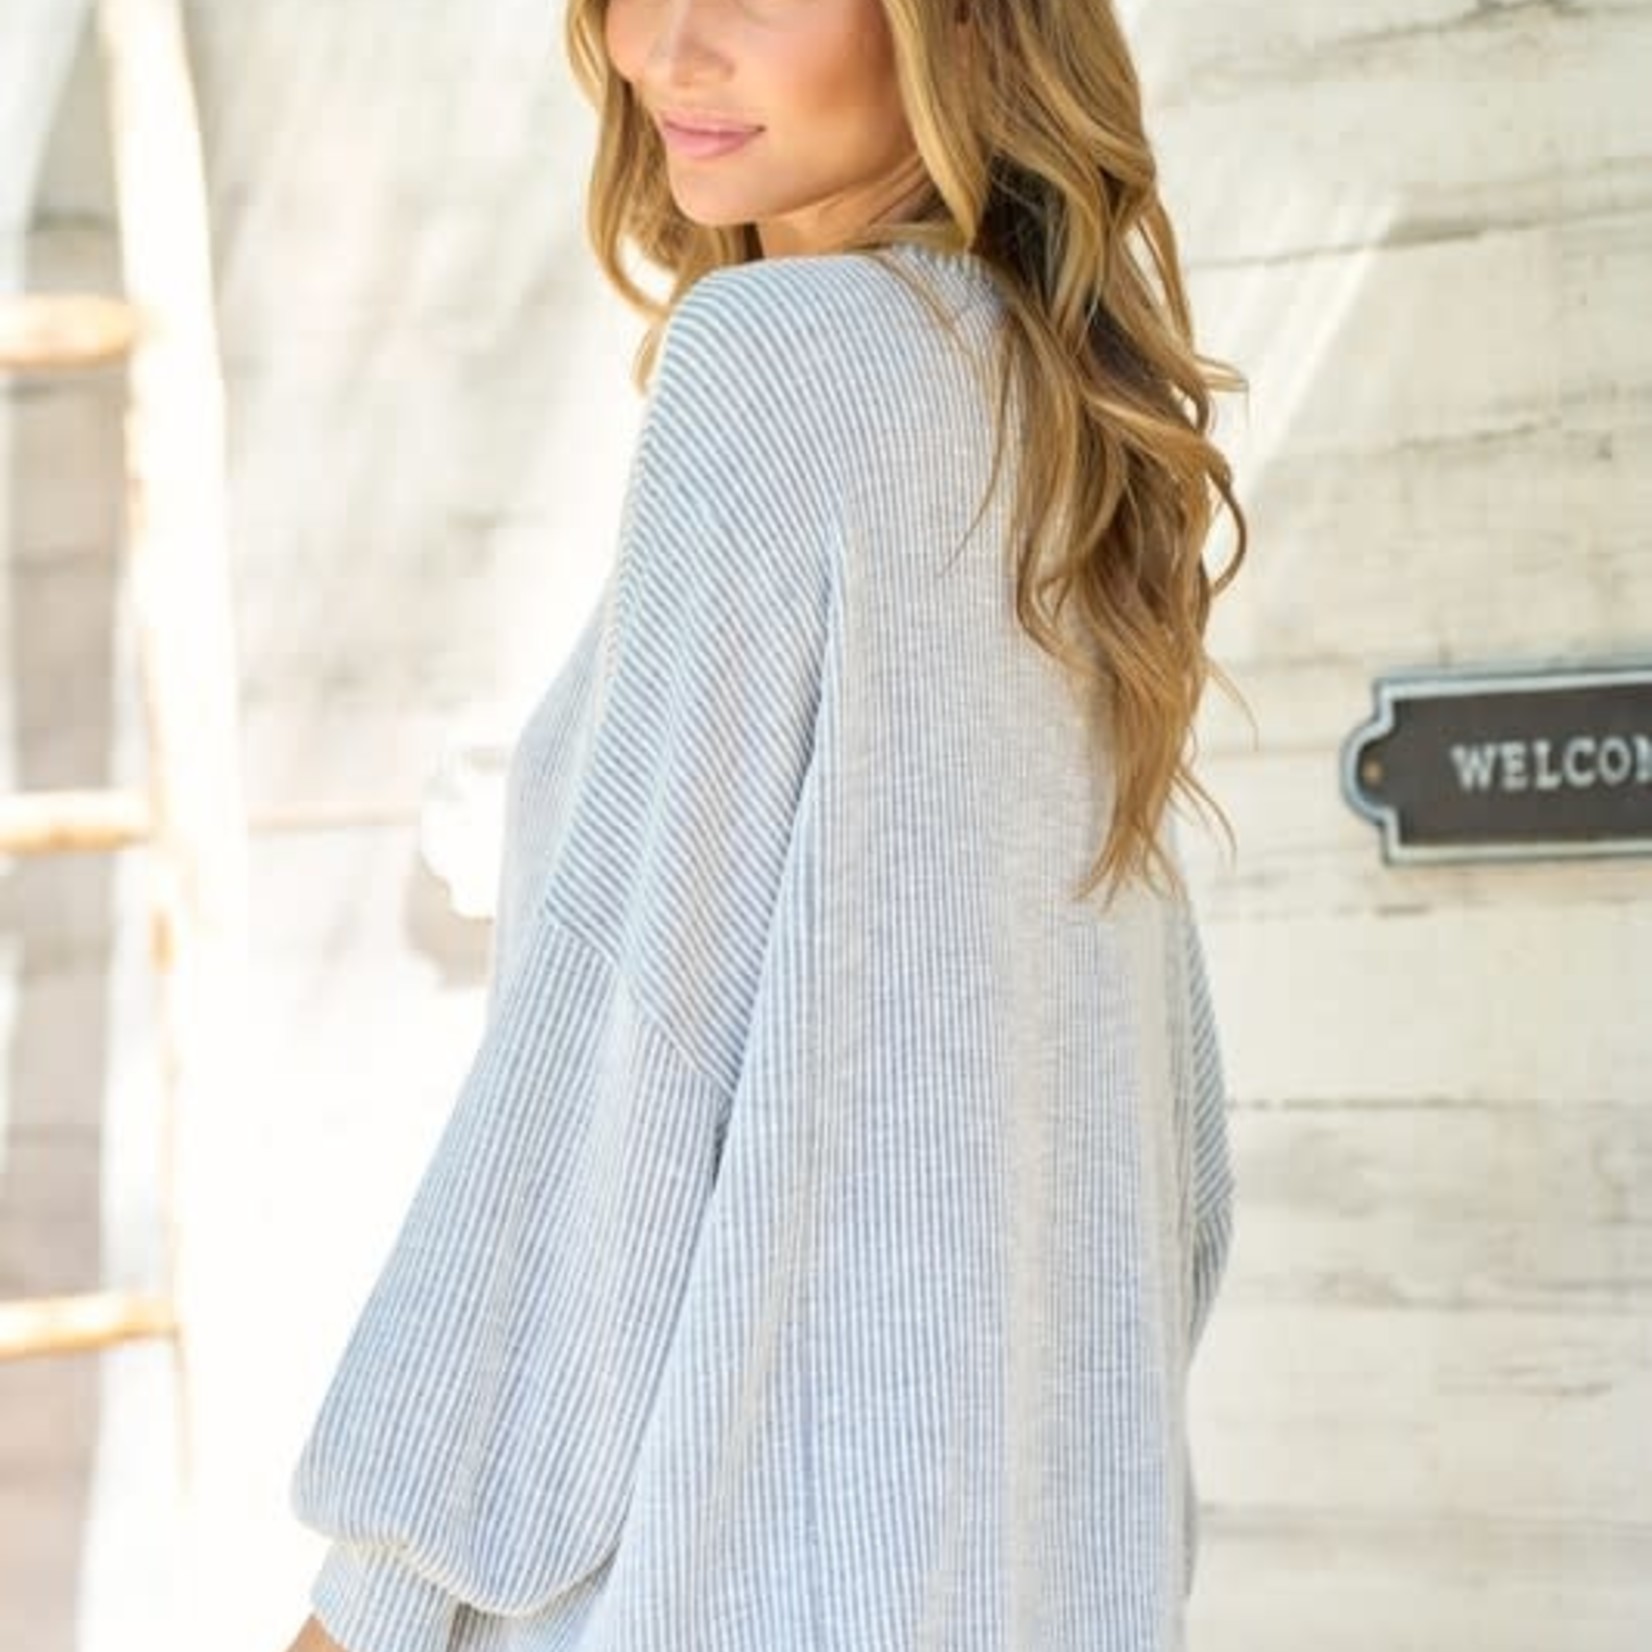 Hailey and Co. Easy Like Sunday Mornings Top